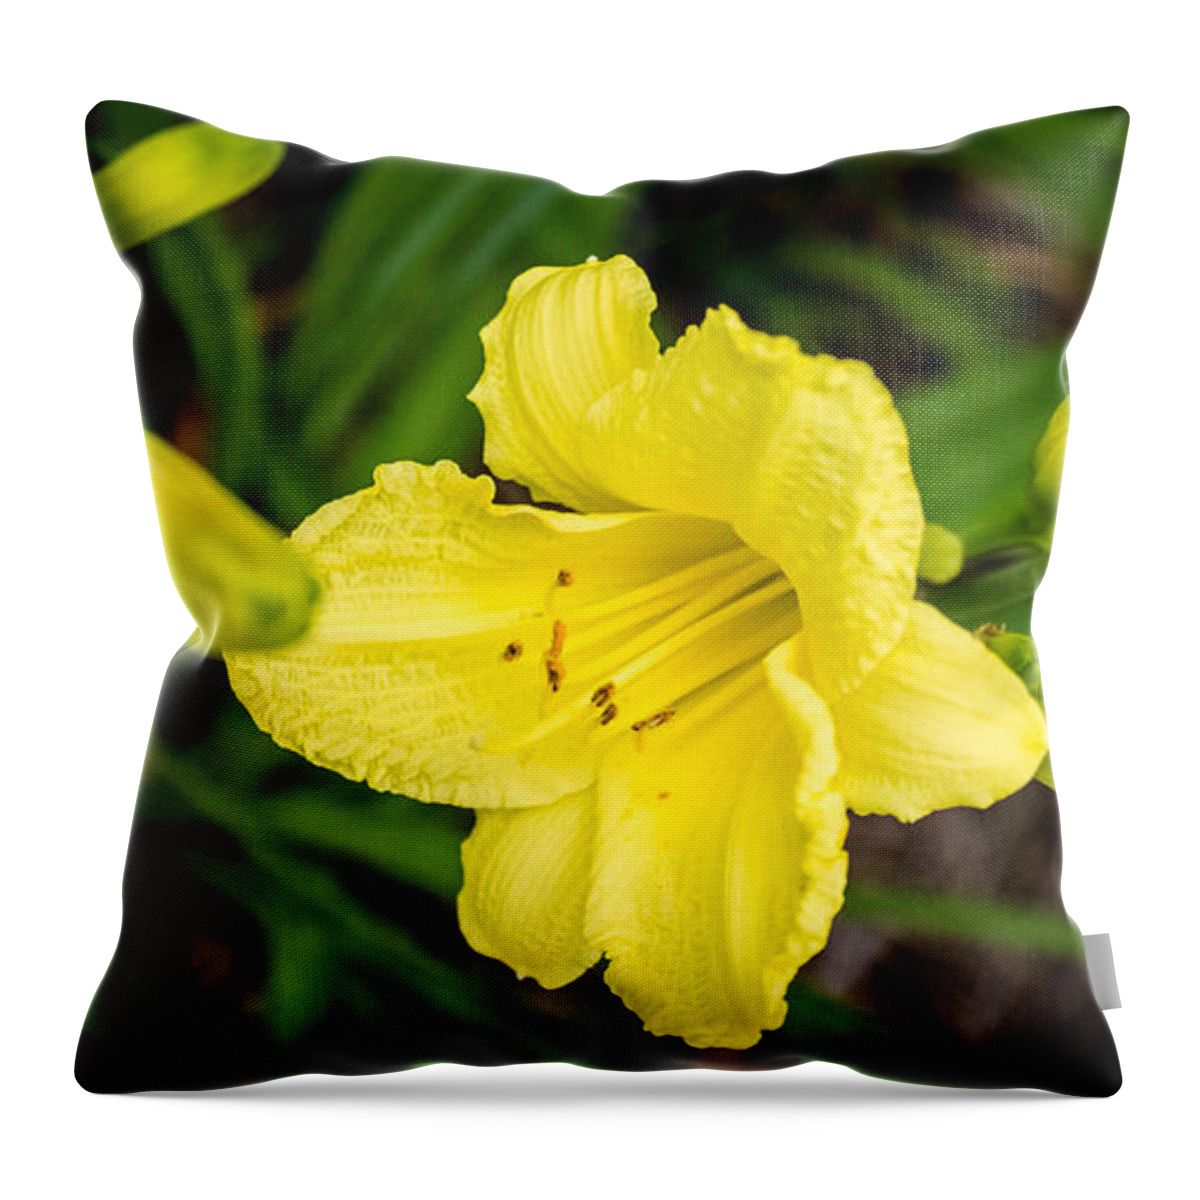 Flower Throw Pillow featuring the photograph Yellow Flower by Mike Dunn